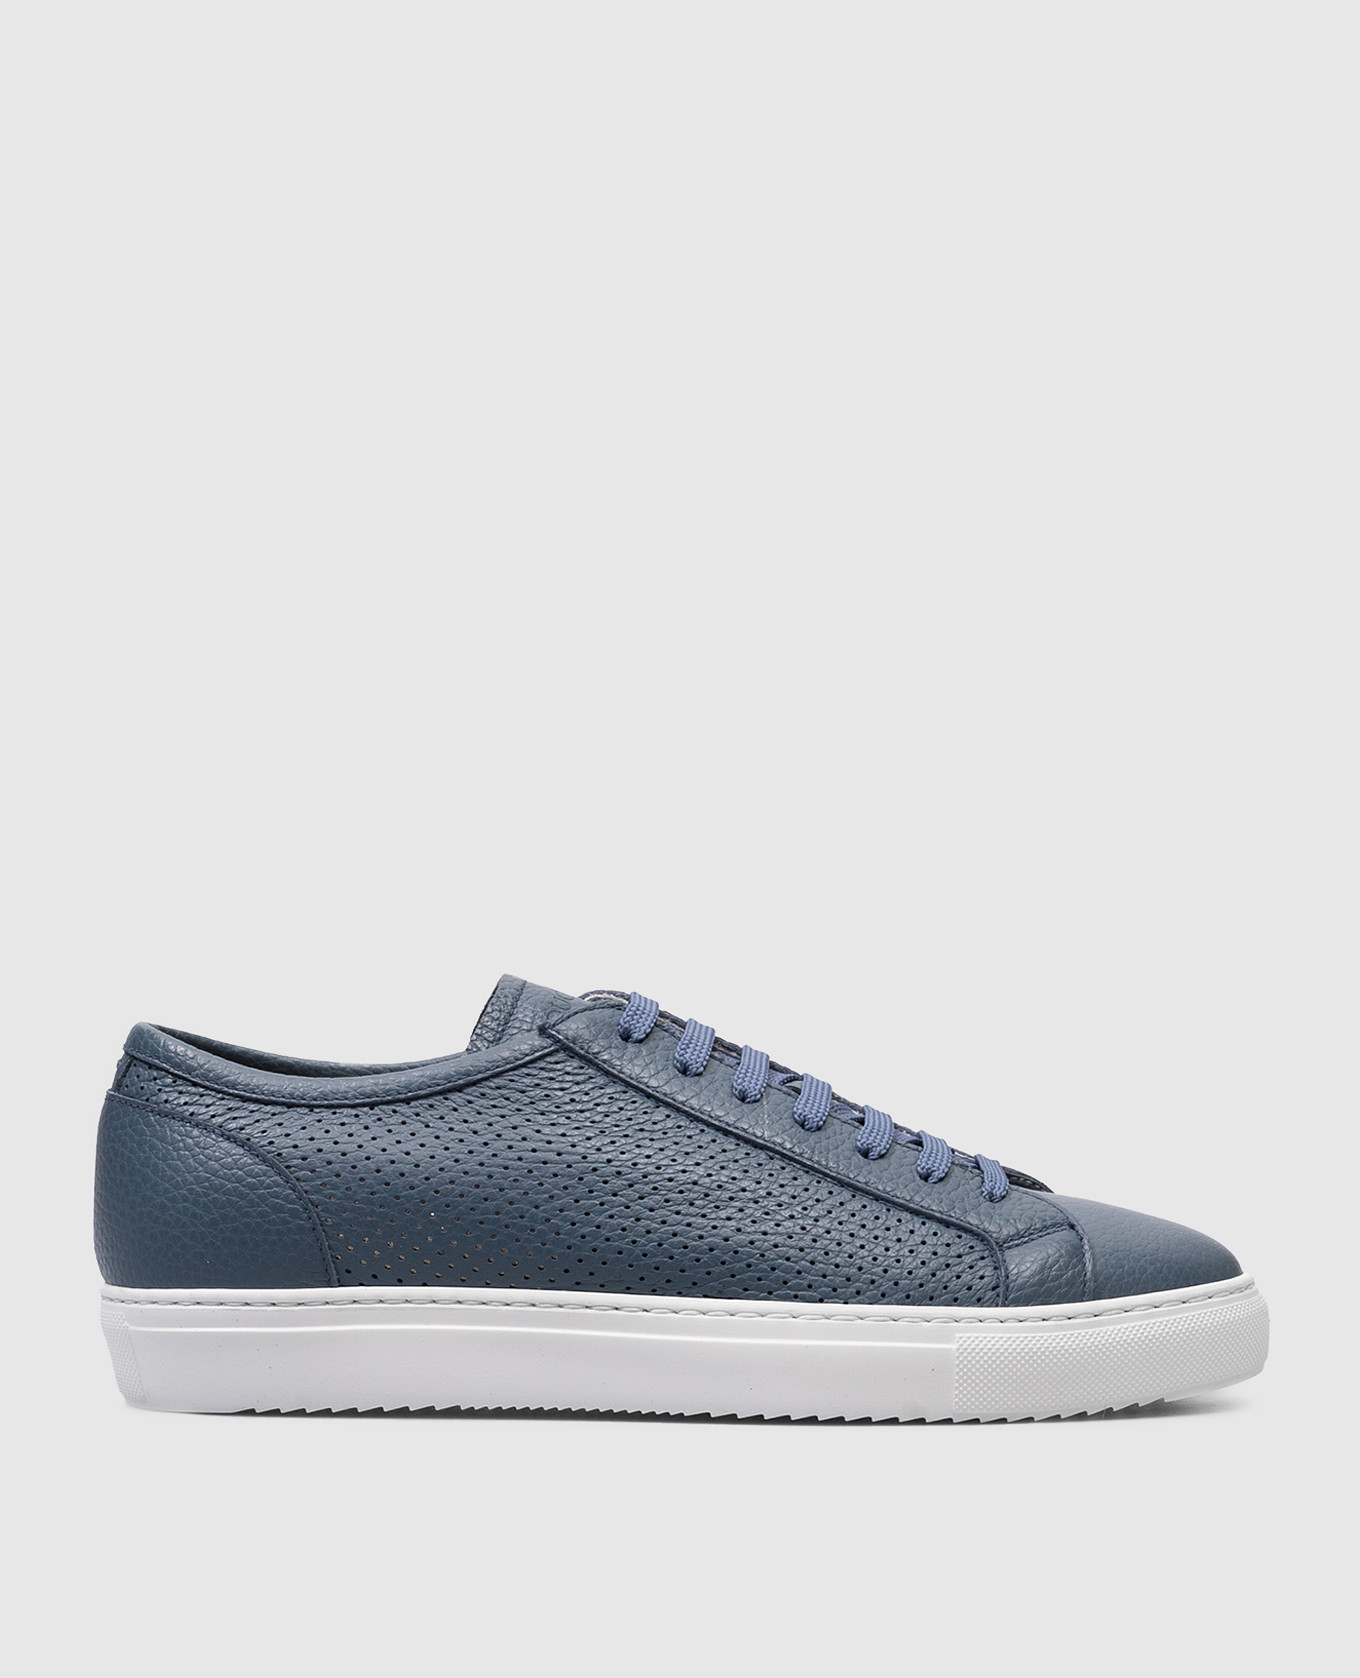 Blue leather sneakers with perforation